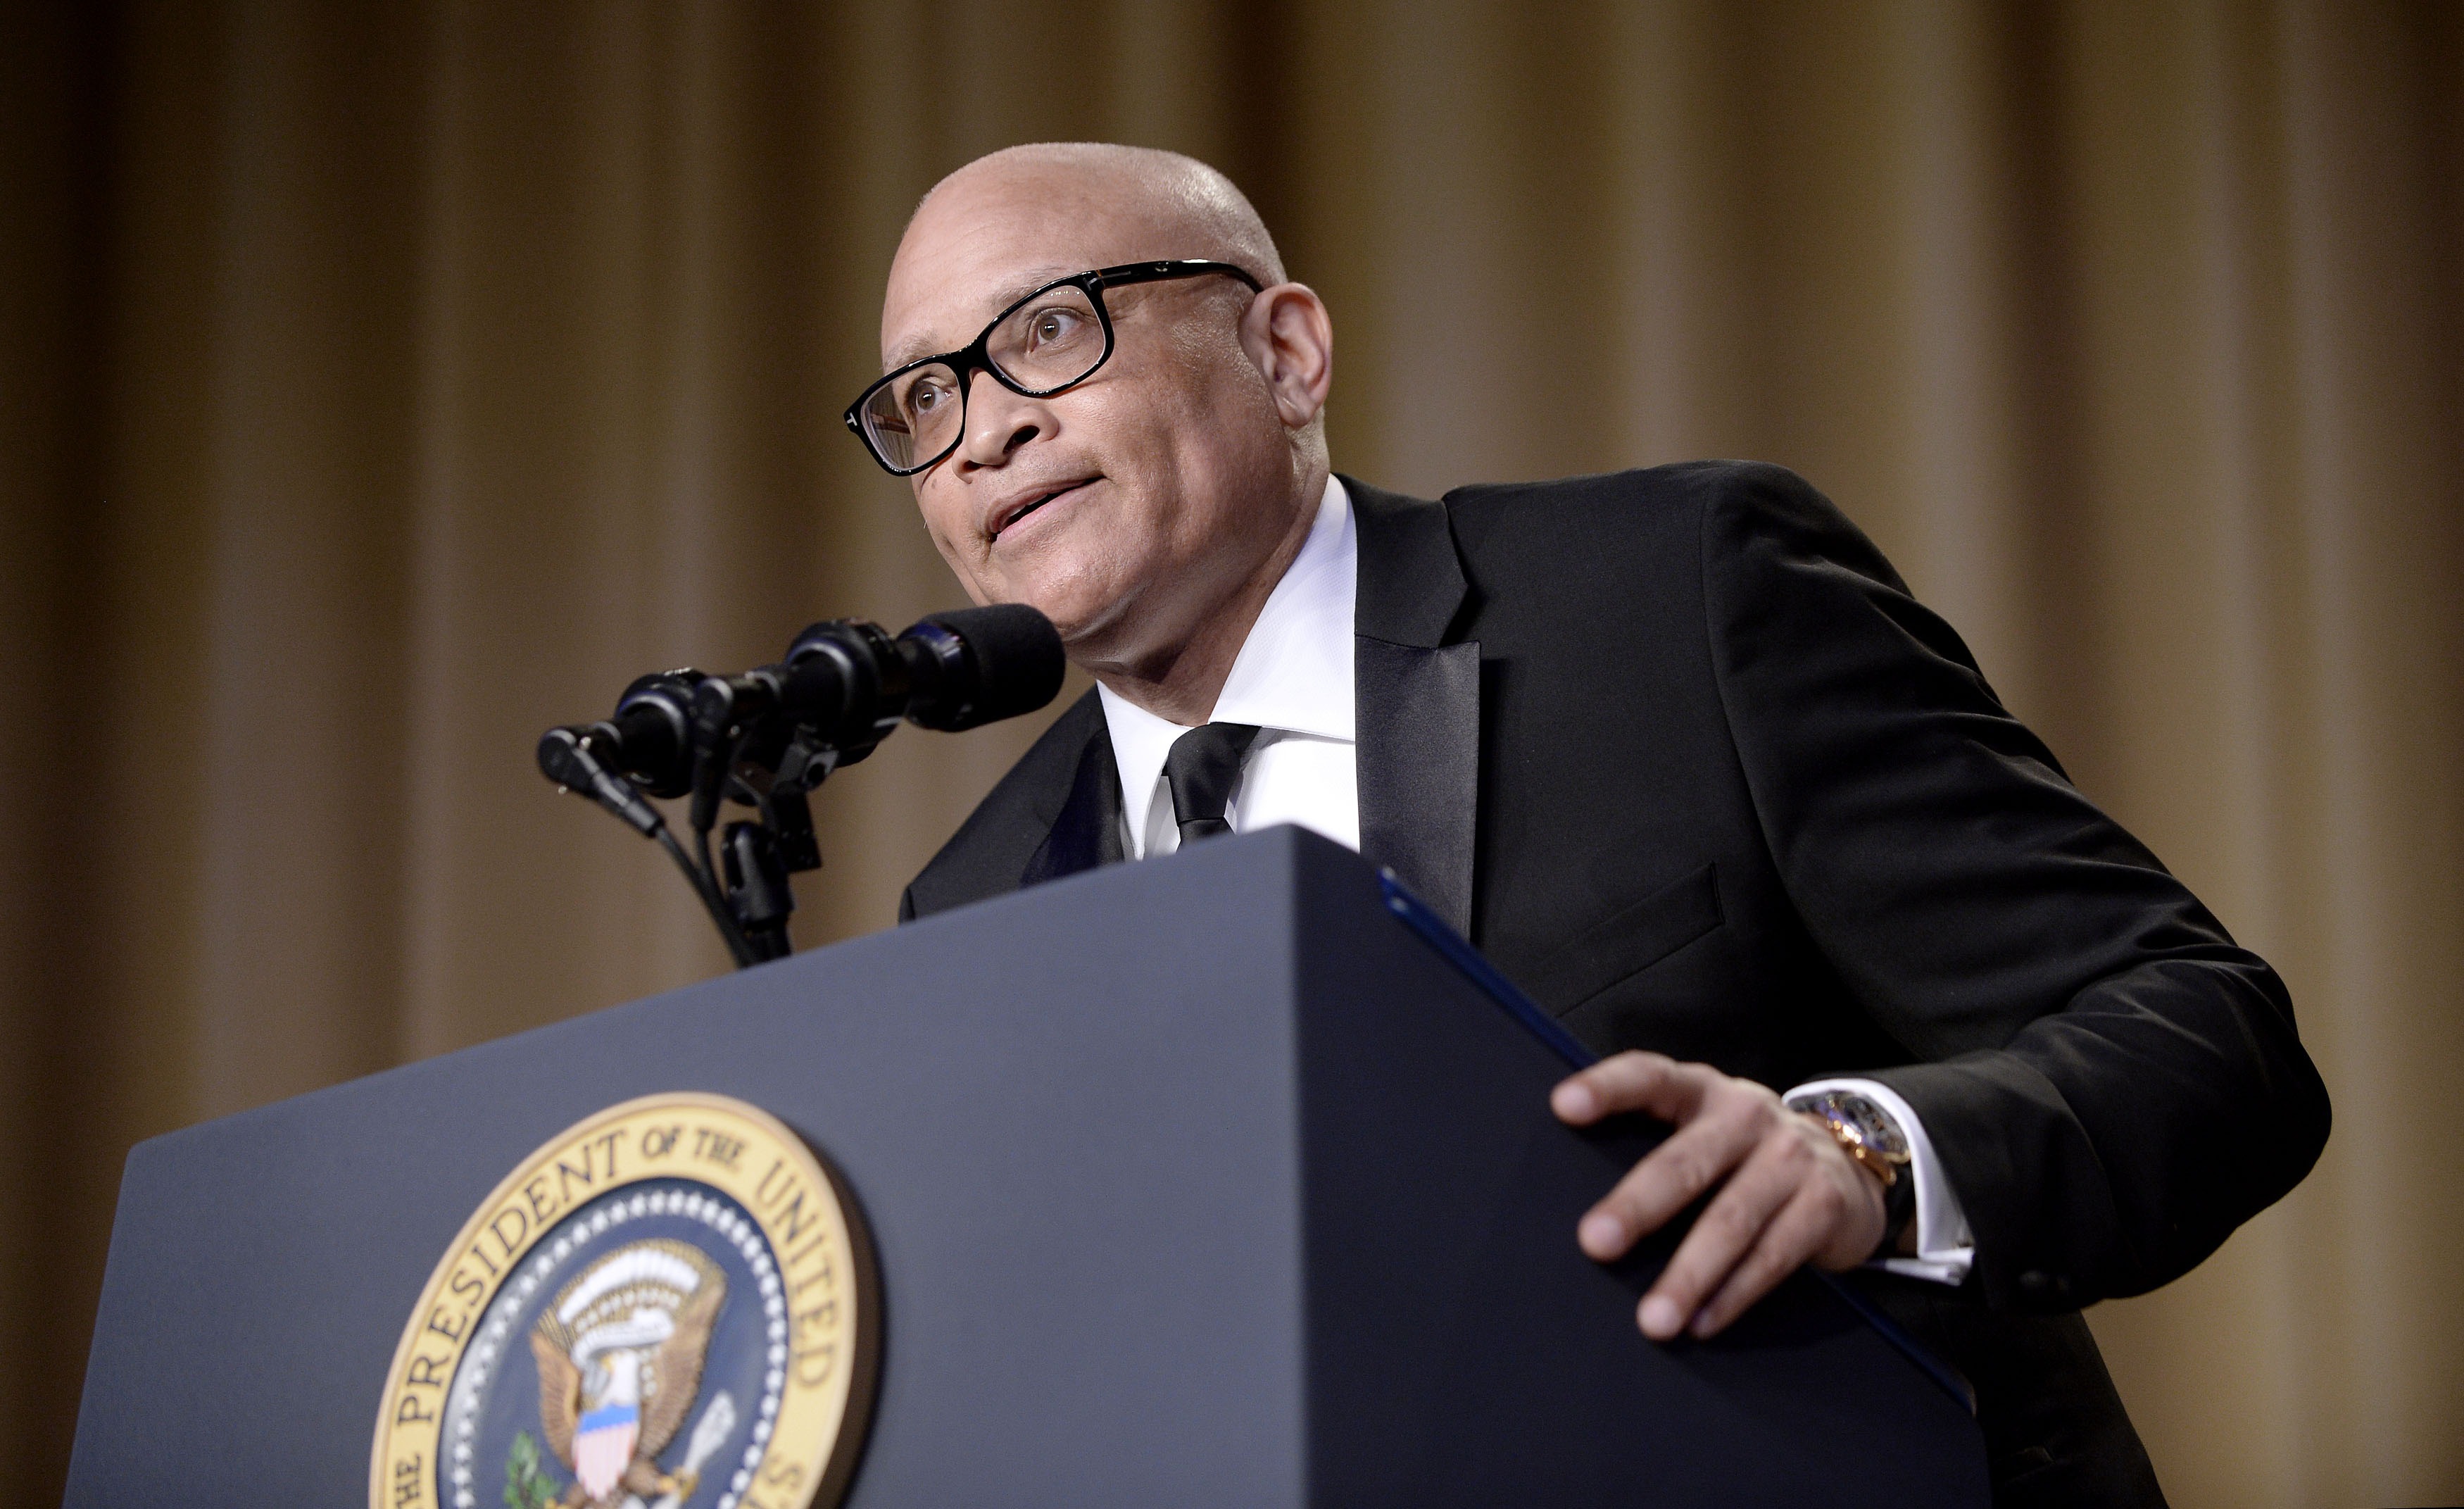 Comedian Larry Wilmore speaks during the White House Correspondents' Association annual dinner at the Washington Hilton hotel in Washington, D.C., on April 30, 2016. (Pool—Getty Images)